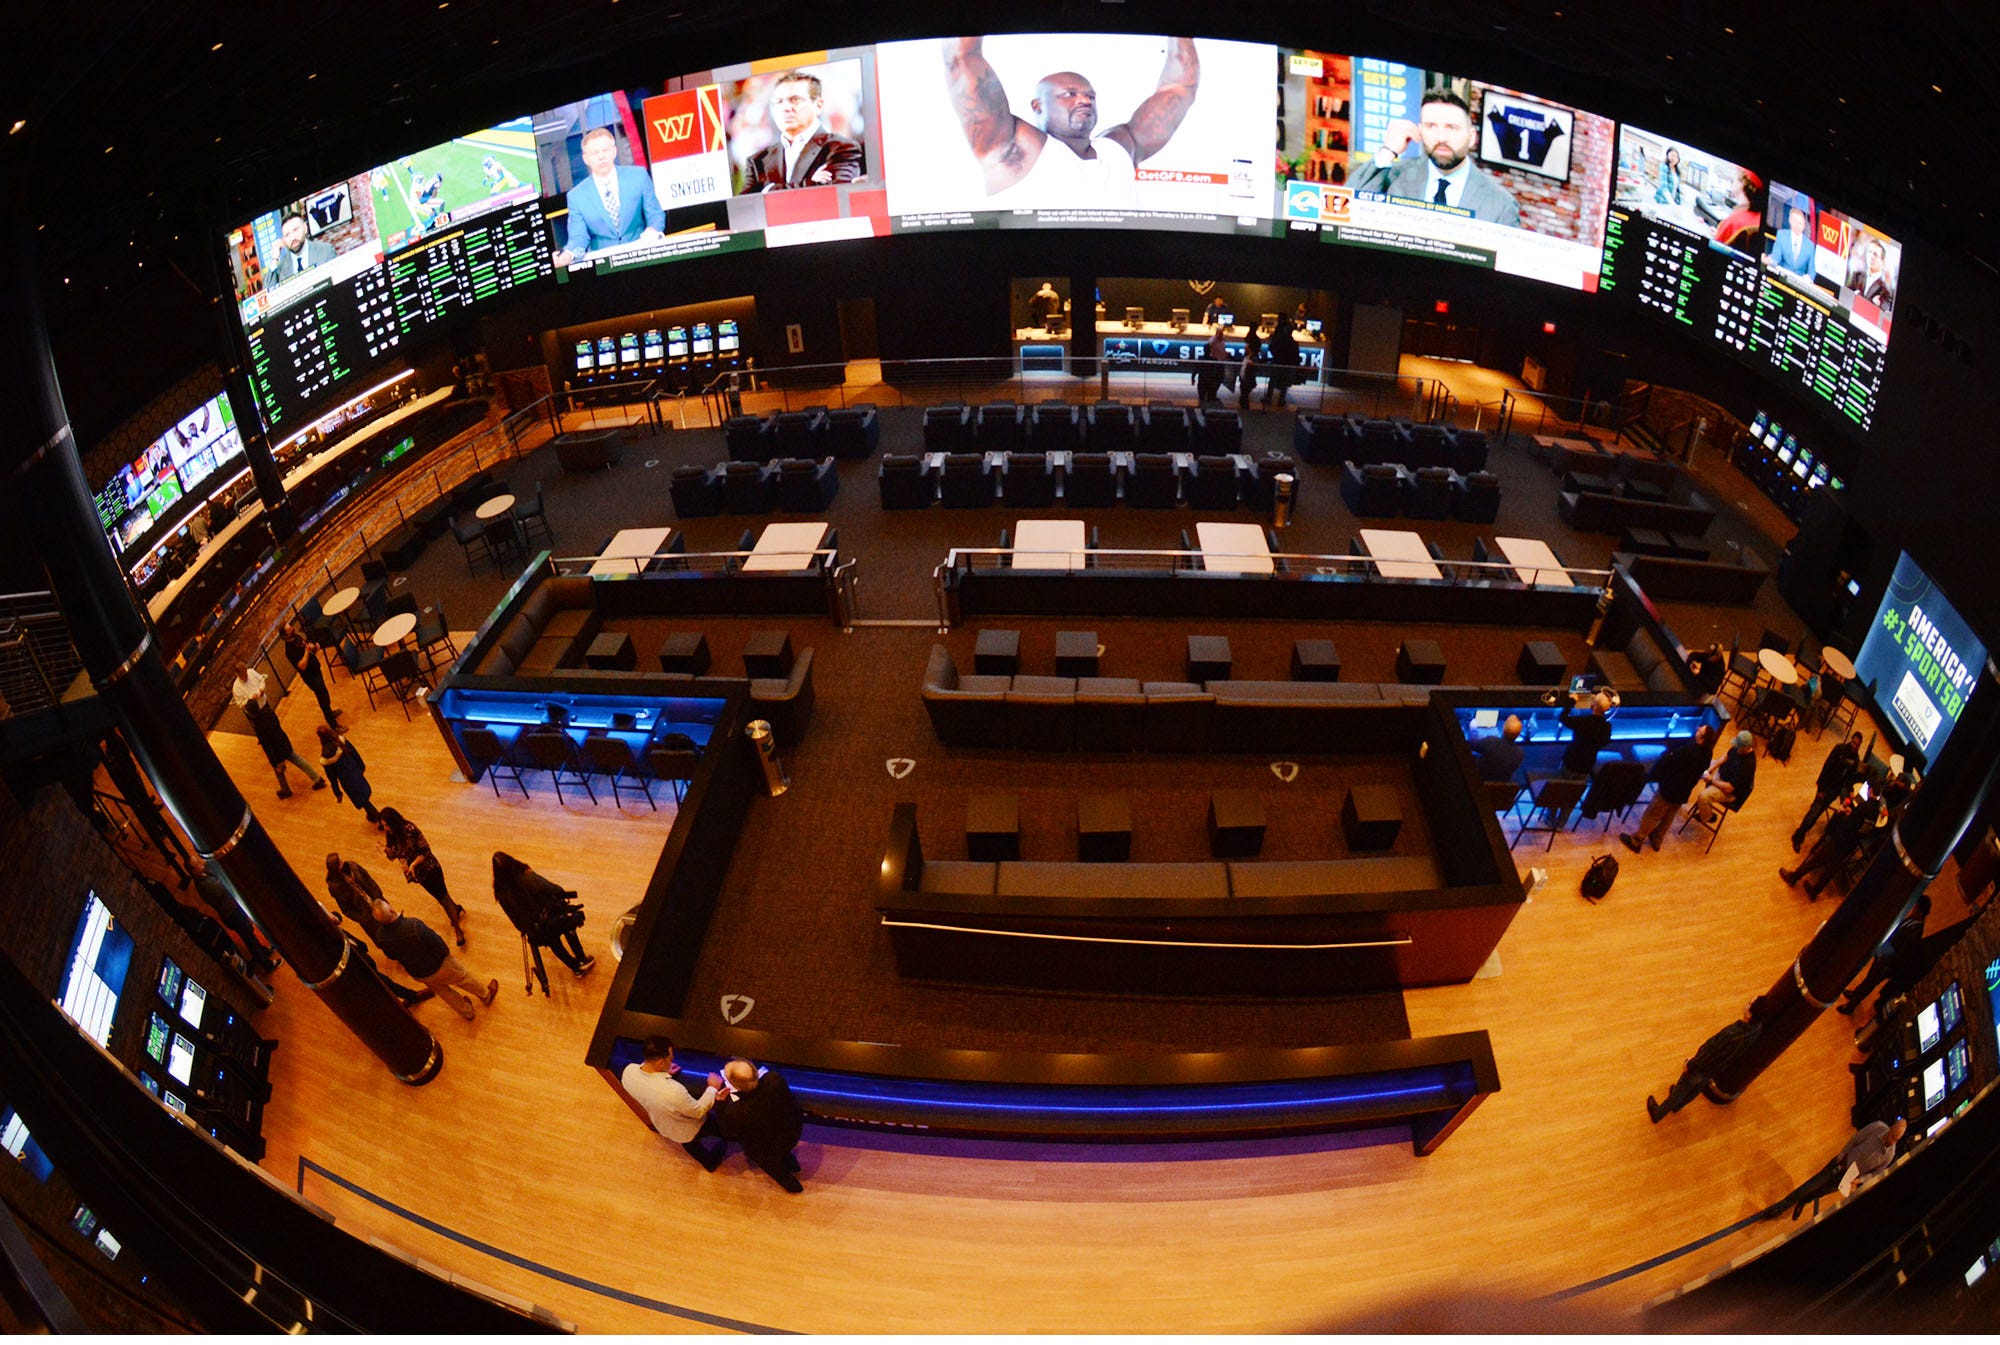 Washington Commanders get permission to open a sportsbook at FedEx Field